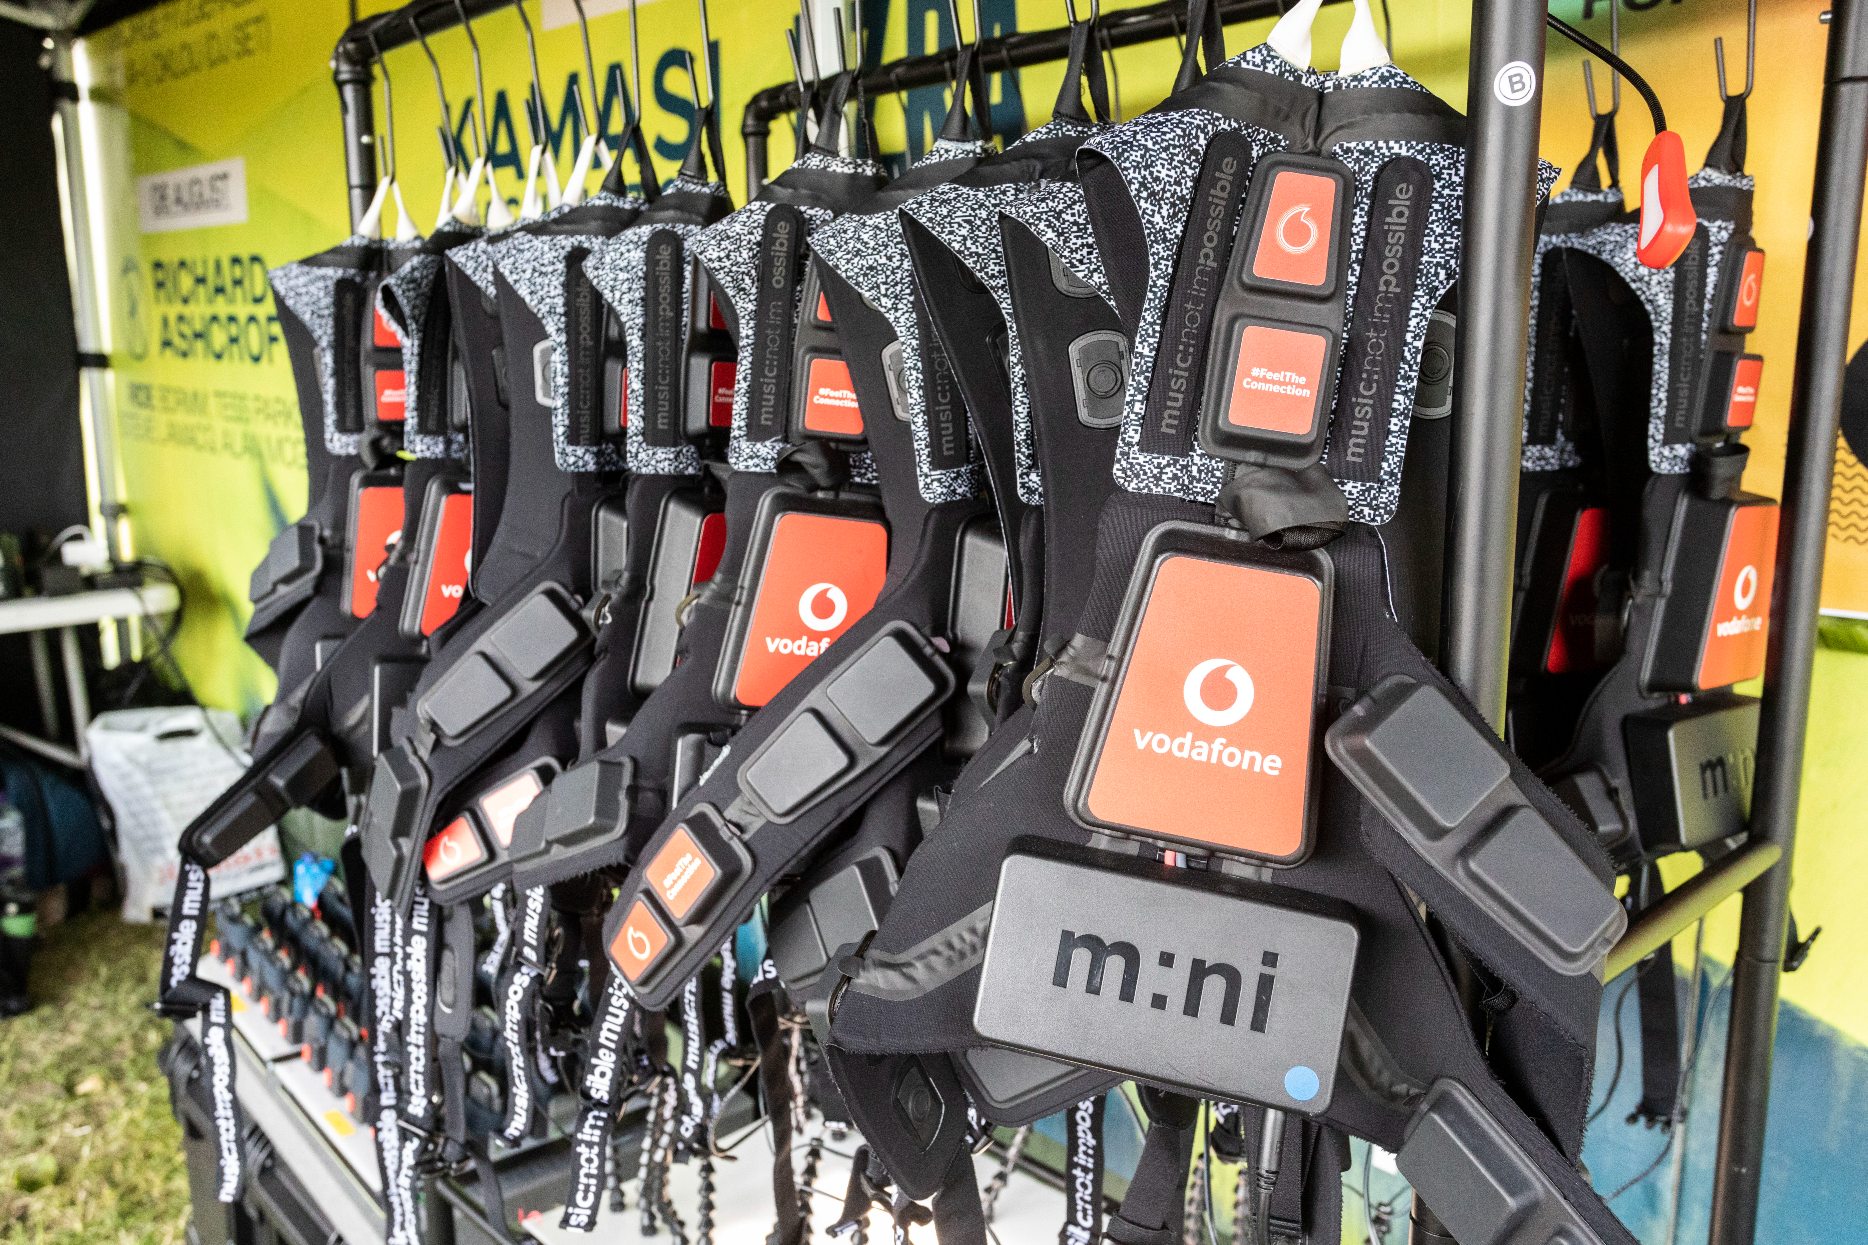 Vodafone 5G haptic suits on a rack at Mighty Hoopla